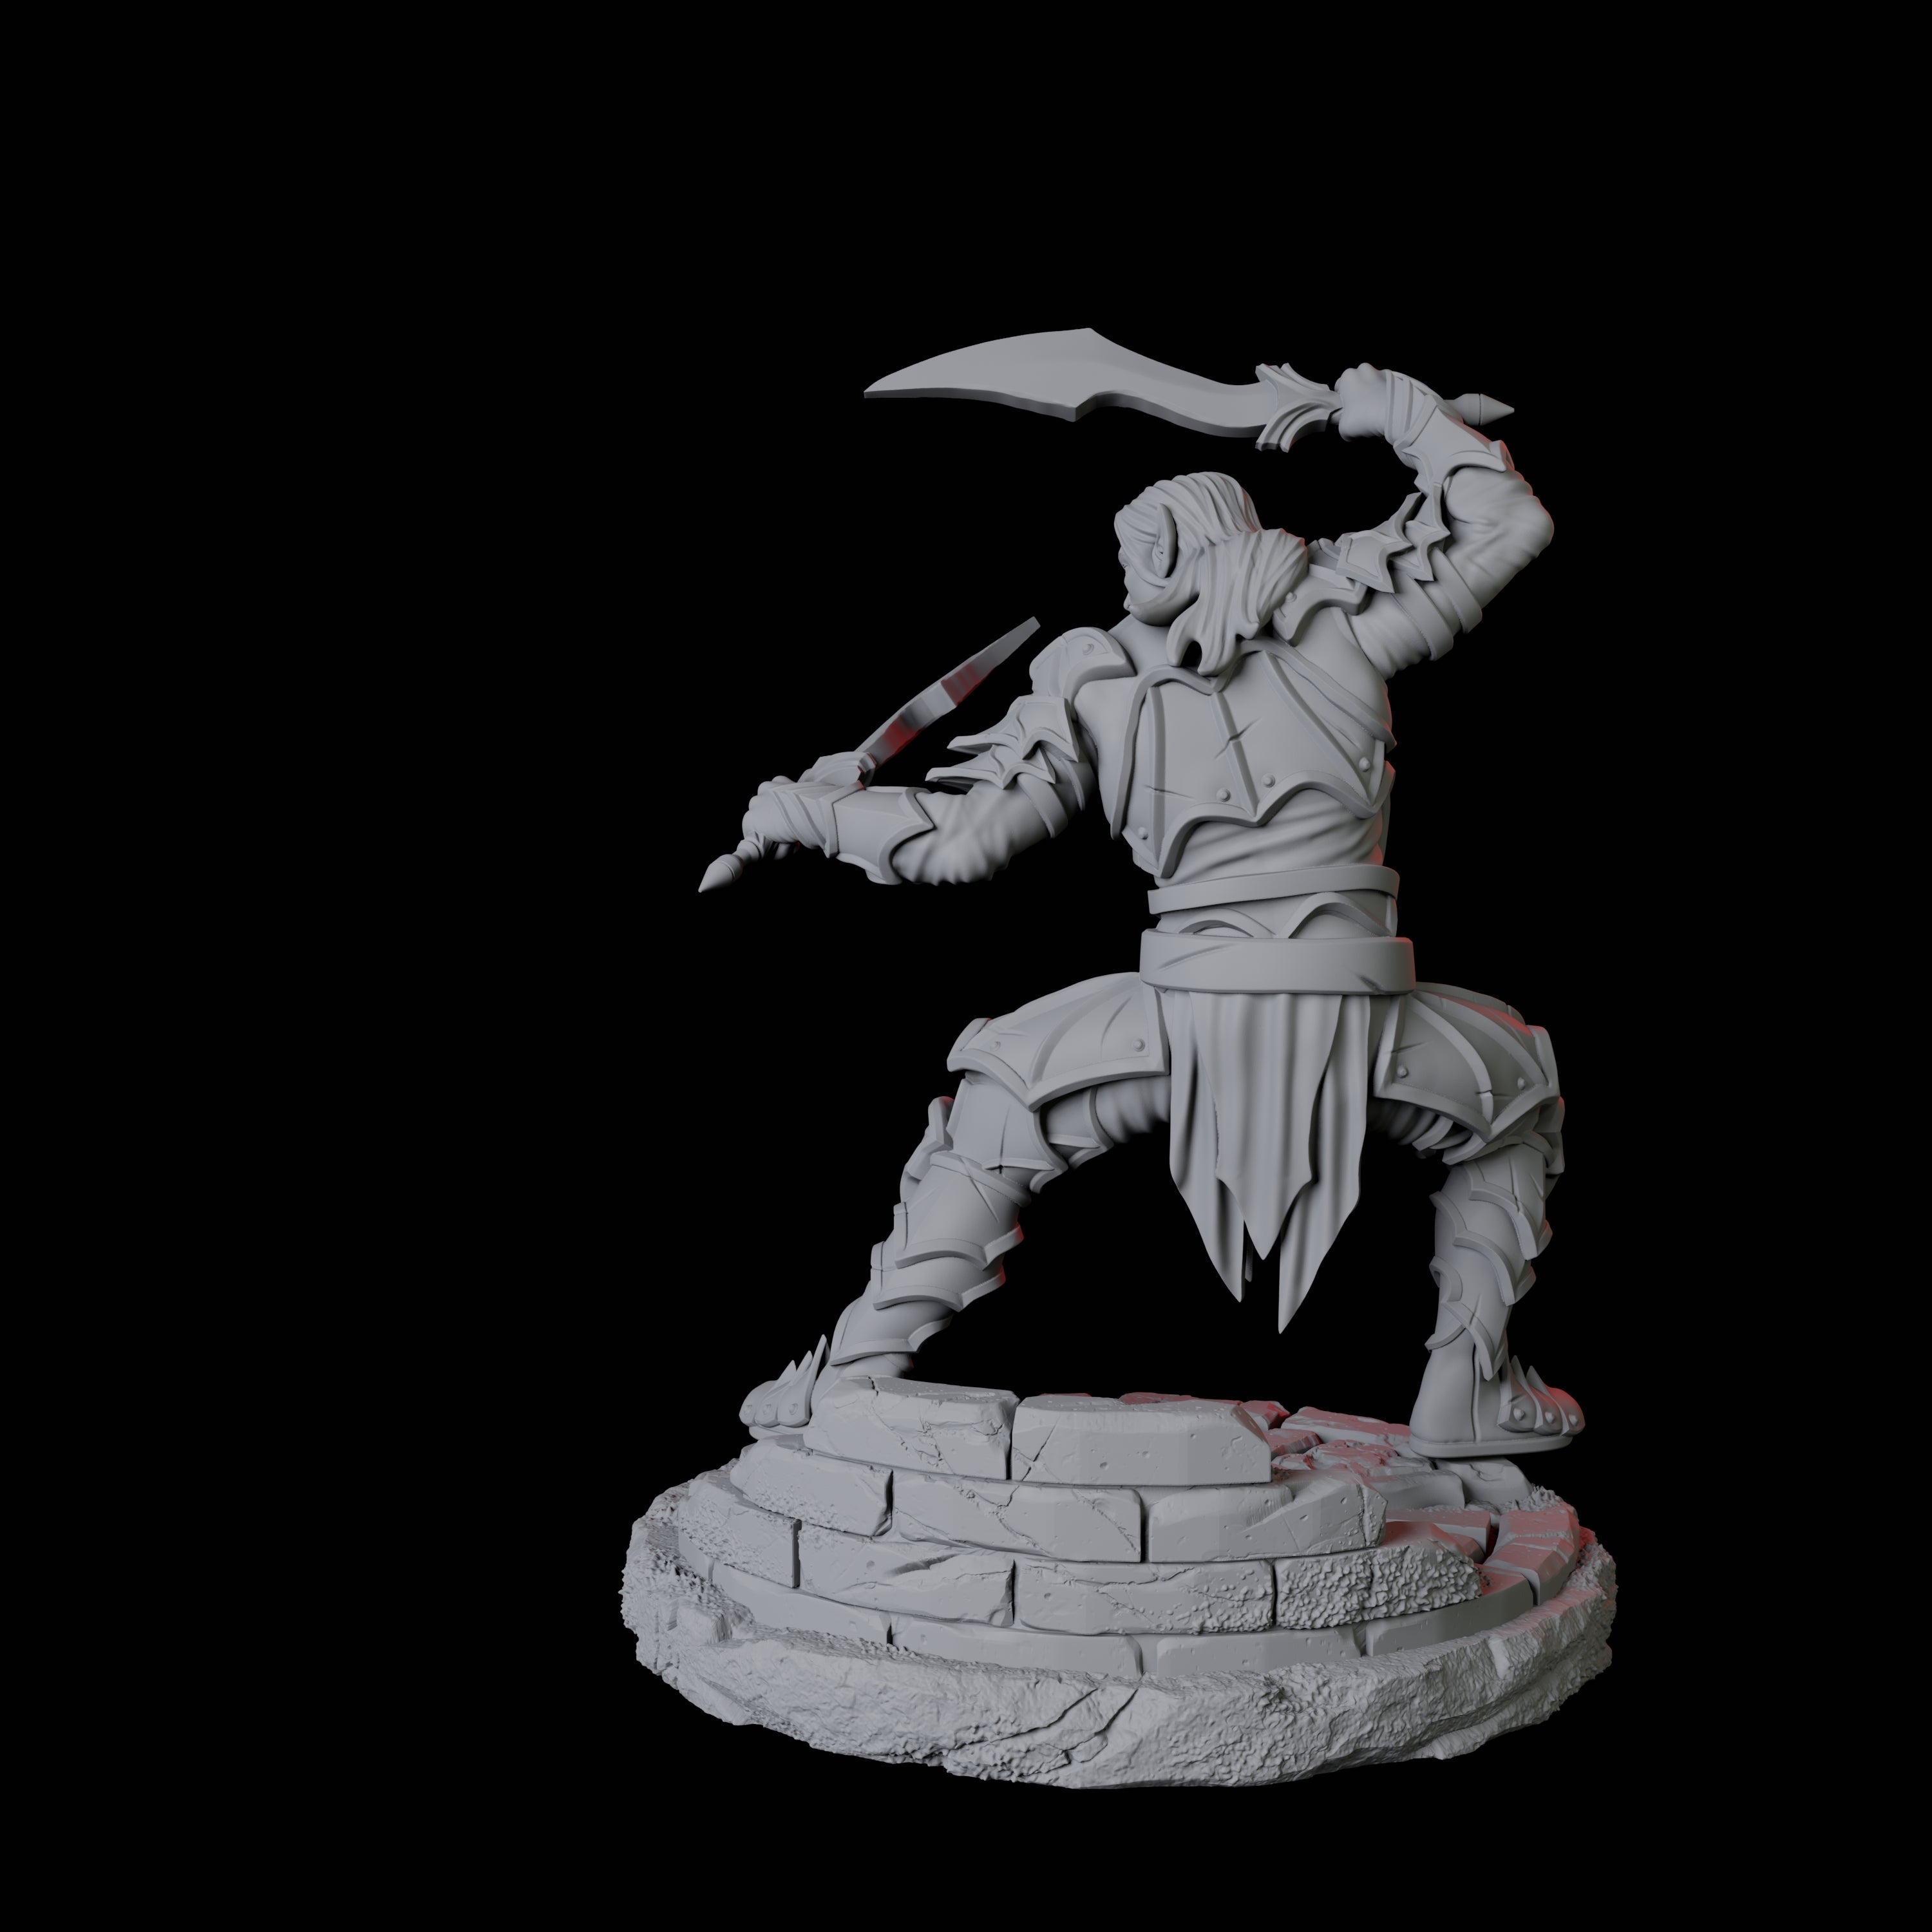 Two Dual Wielding Swordsman B Miniature for Dungeons and Dragons, Pathfinder or other TTRPGs